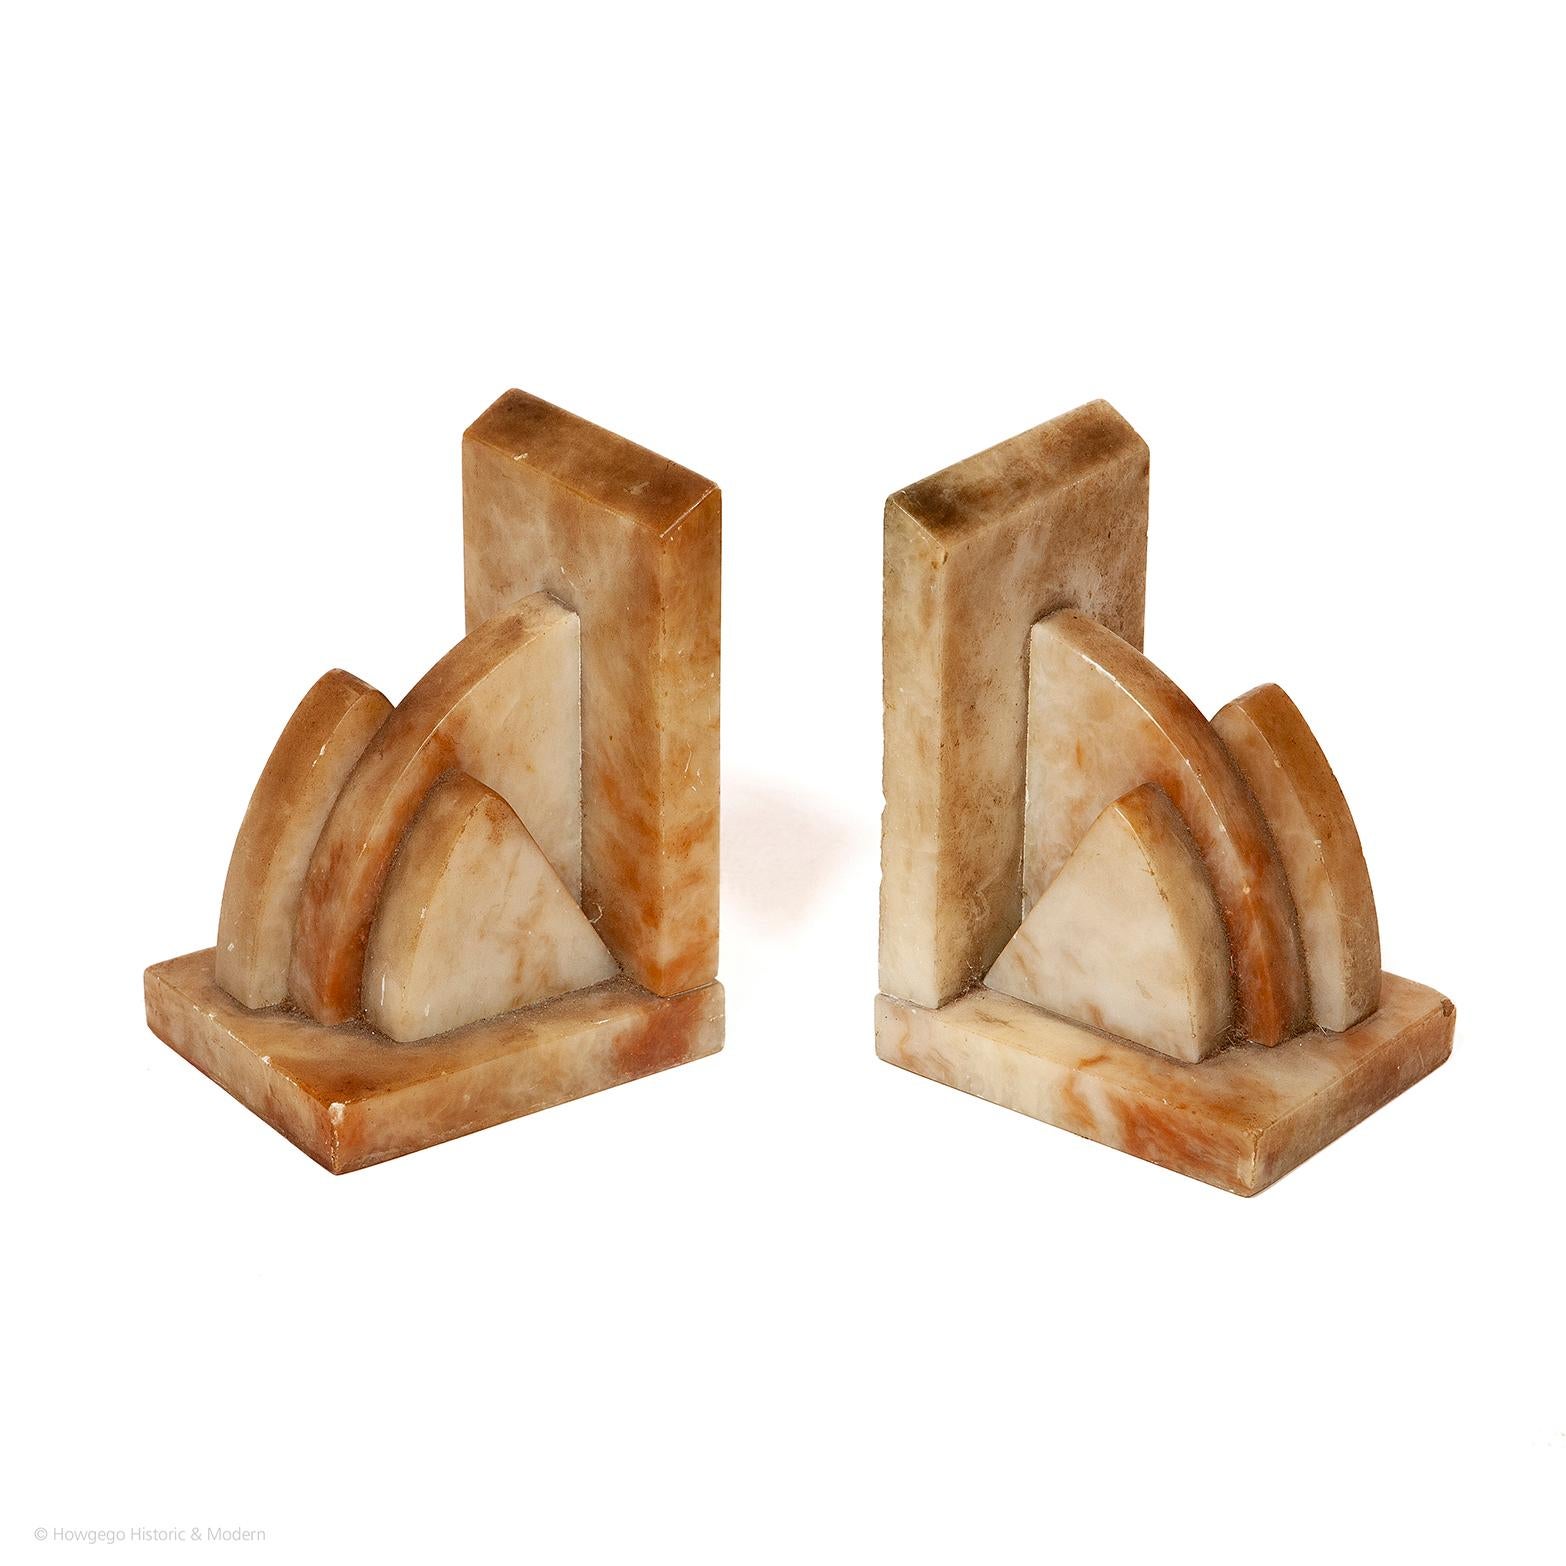 - Very fine quality evoking classic Art Deco architectural designs 
- Beautiful form with the layered segmented curves creating soft yet bold forms and depth
- Really practical for displaying books or papers

Measures: Height - 16.5cm 
Width -